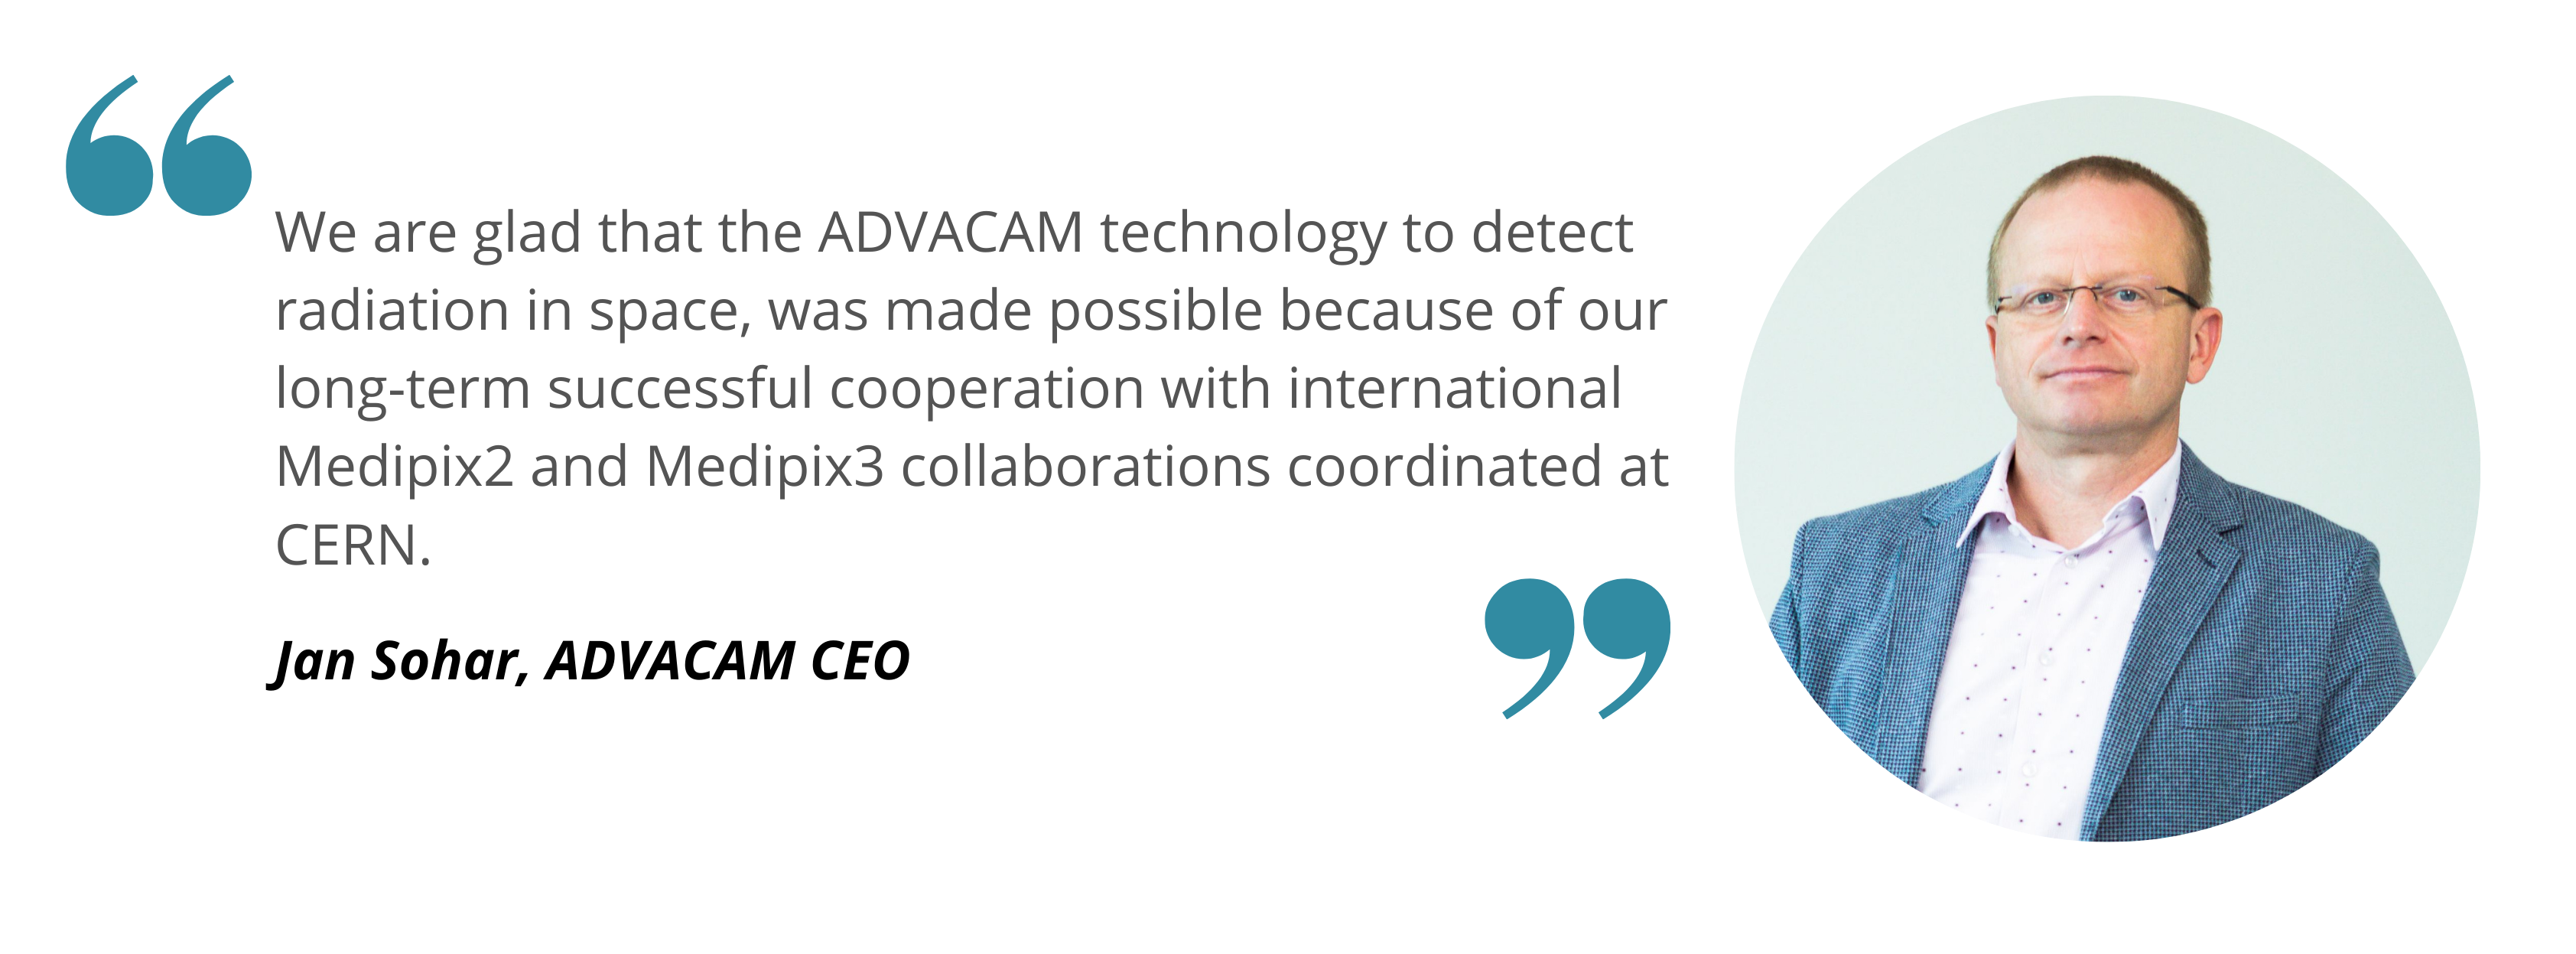 Jan Sohar ADVACAM We are glad that the ADVACAM technology to detect radiation in space, was made possible because of our long-term successful cooperation with international Medipix2 and Medipix3 collaborations coordinated at CERN. Jan Sohar, ADVACAM CEO